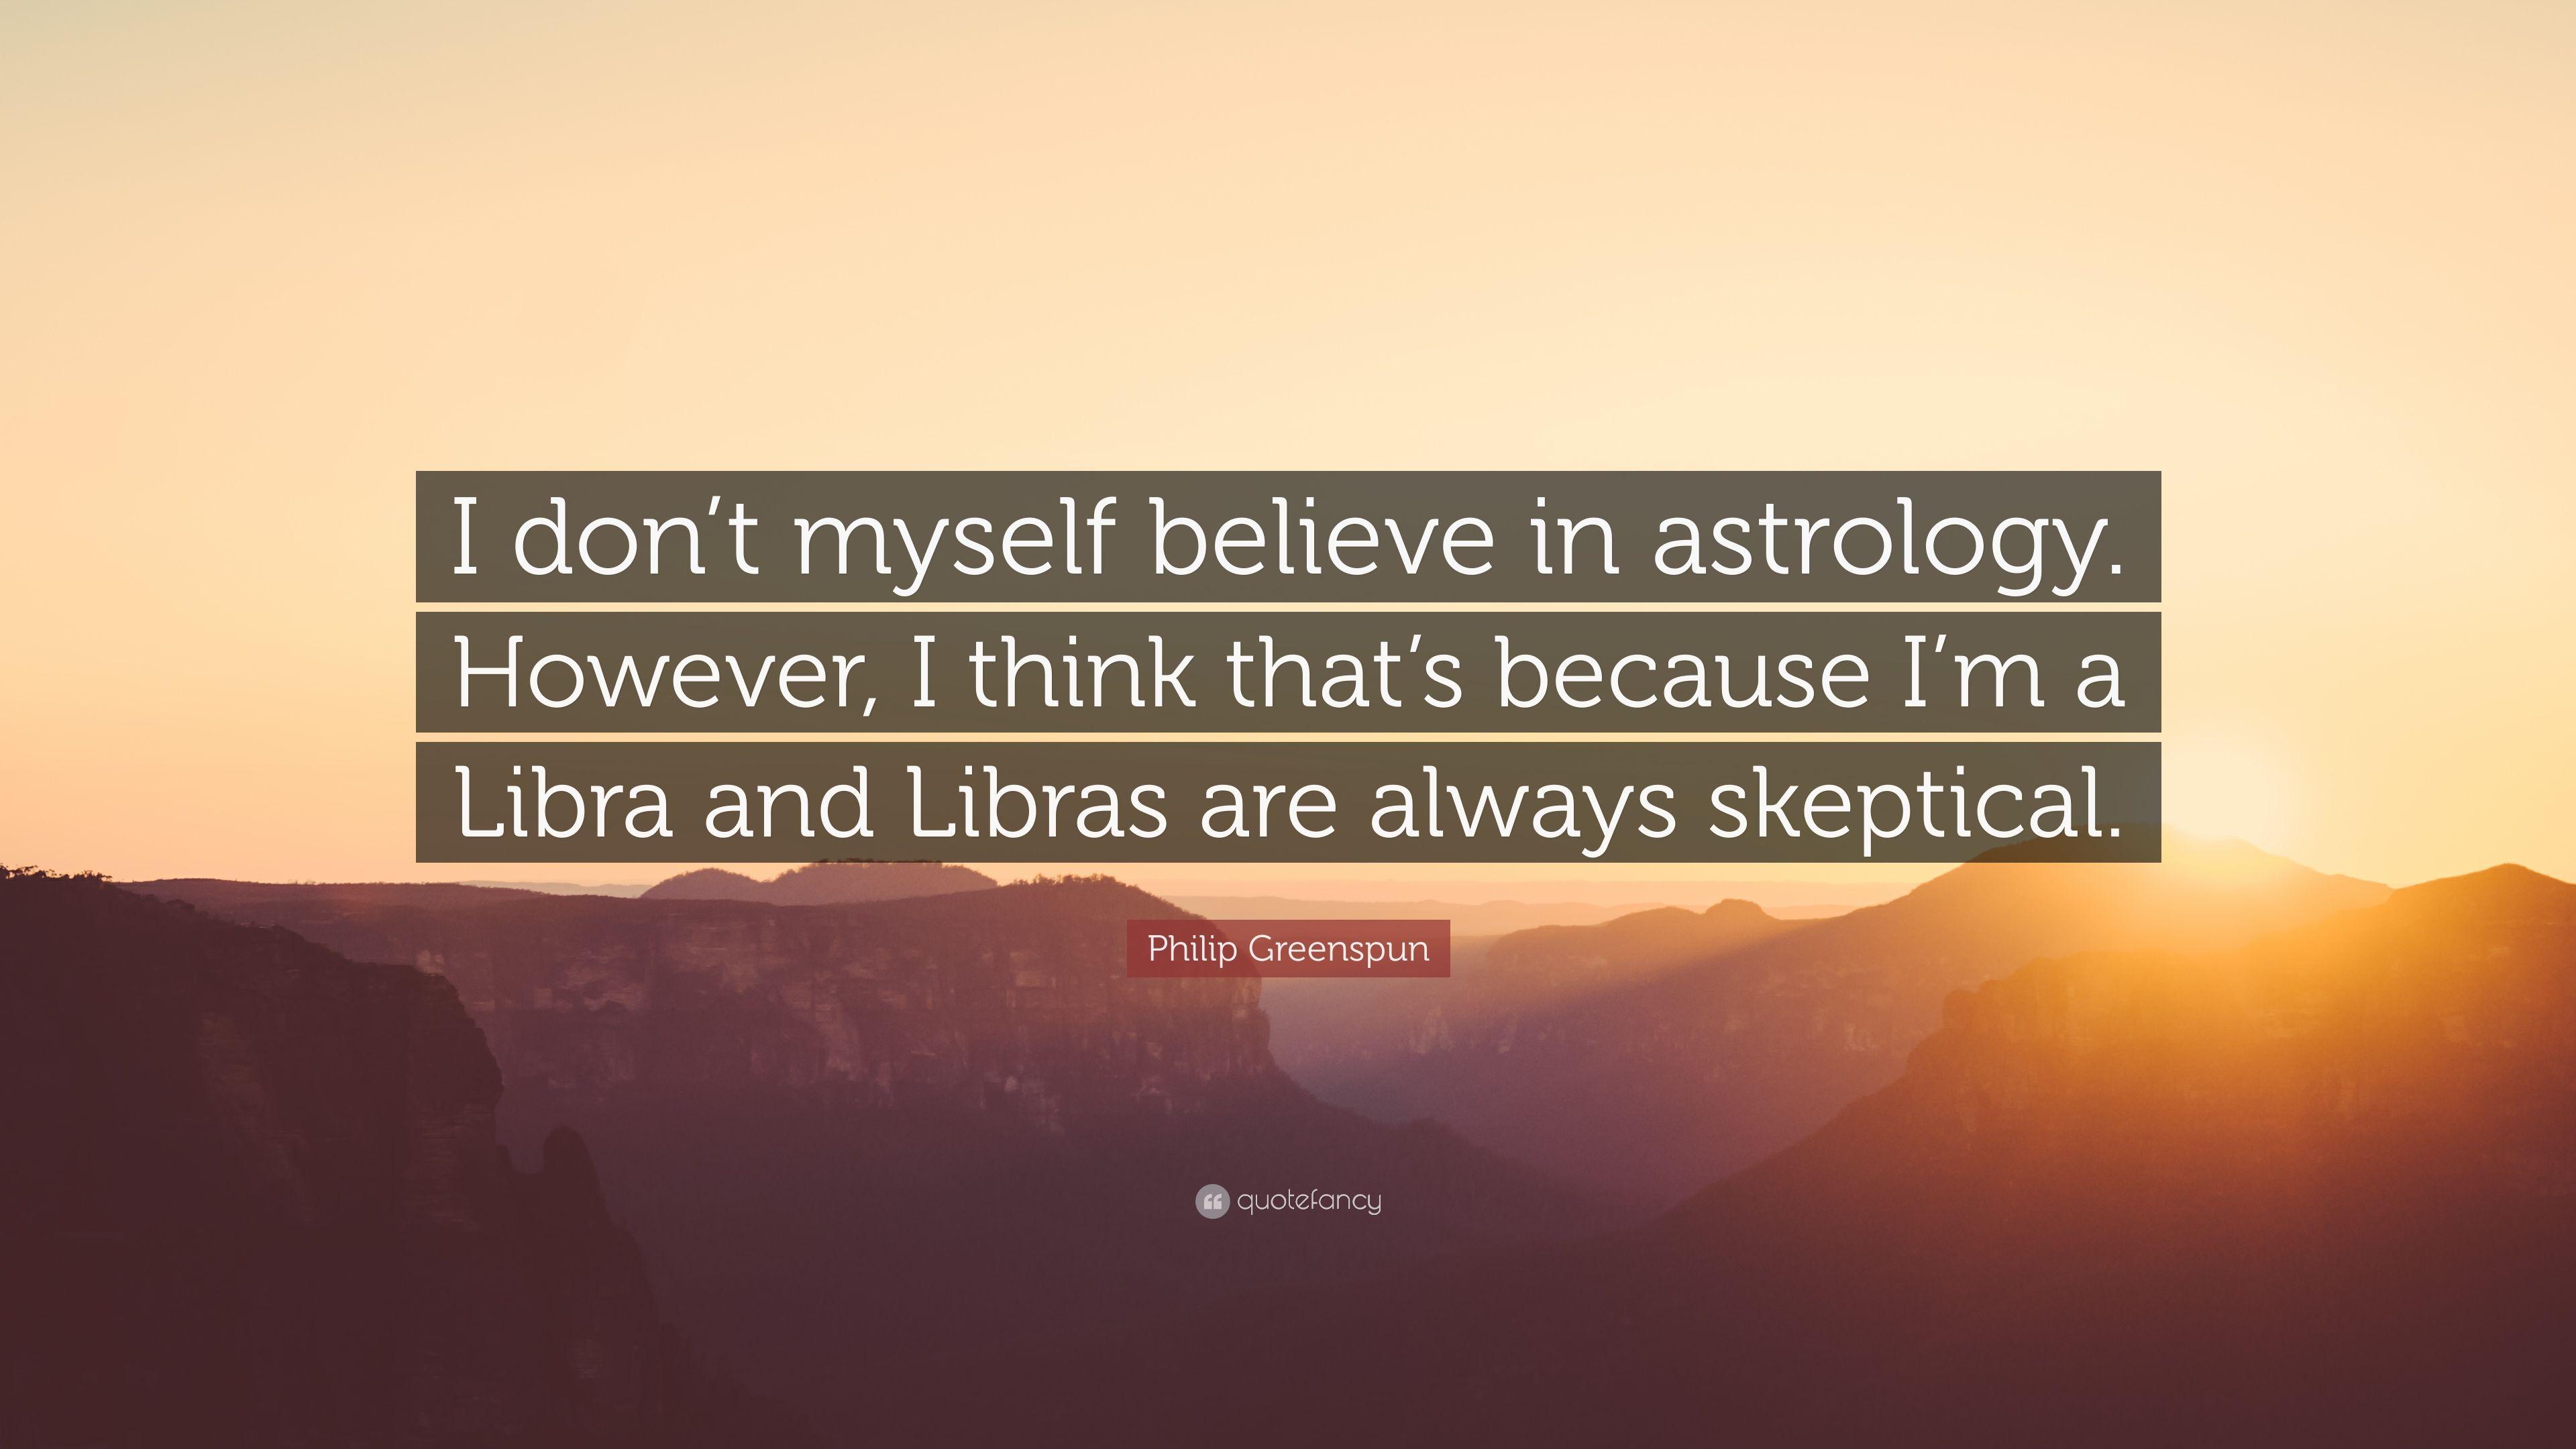 Libra Quotes Wallpaper Libra Quotes Wallpaper Image About